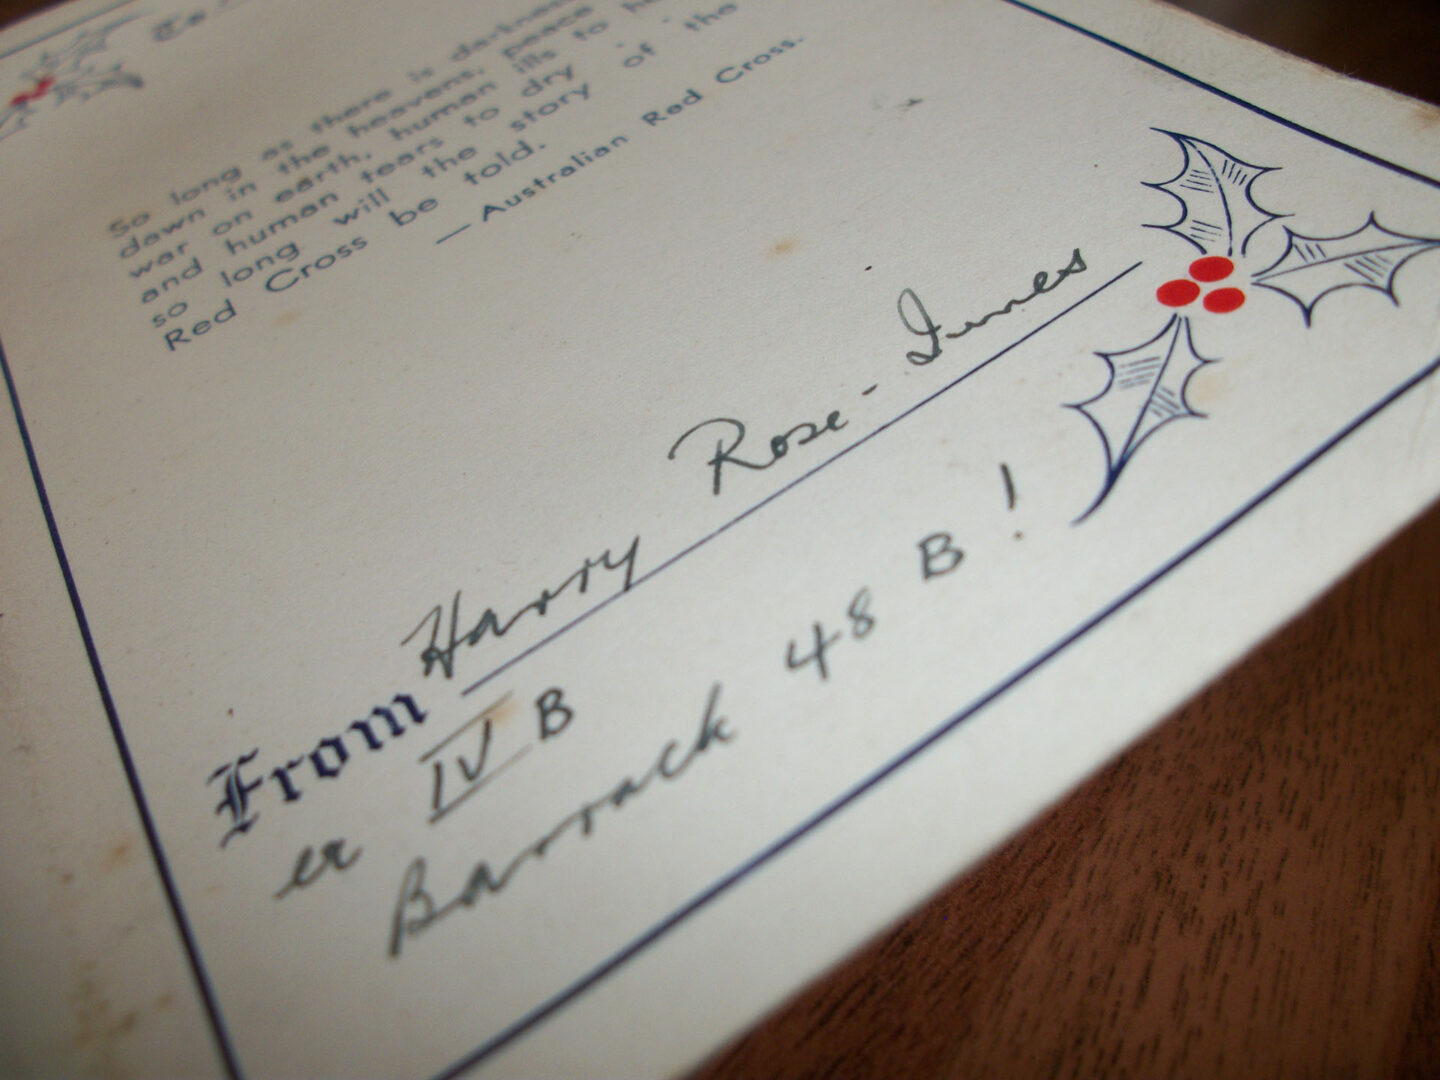 A Christmas card sent from Harry Rose-Innes in Port Elizabeth, South Africa written to Alexander Liggett in Portadown, Co. Armagh. The two had been prisoners of war together in Germany.